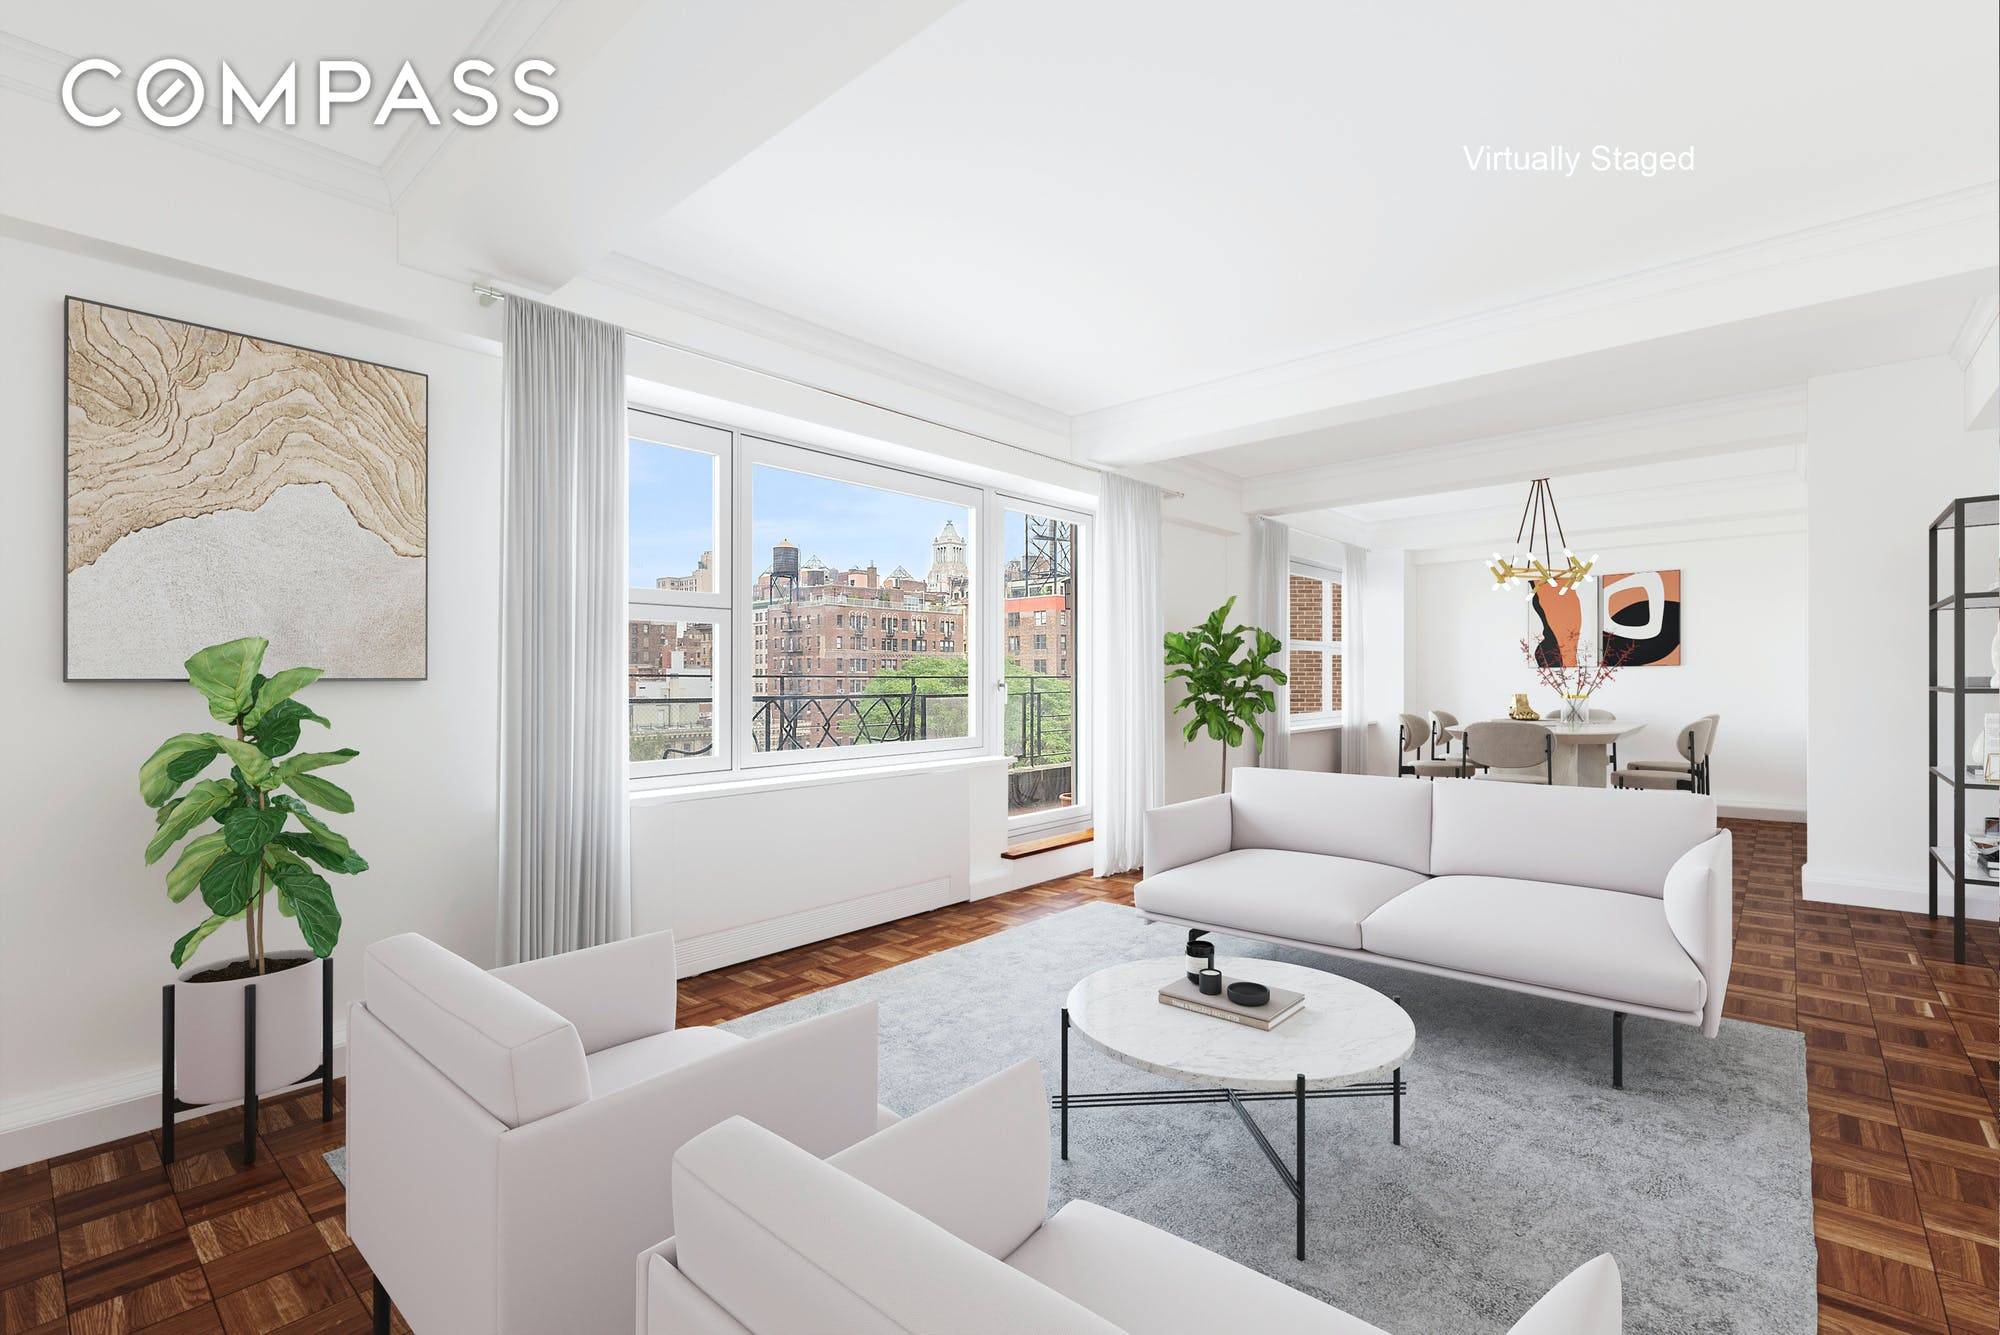 Rarely available, this gorgeous Greenwich Village home starts the conversation around old and new.